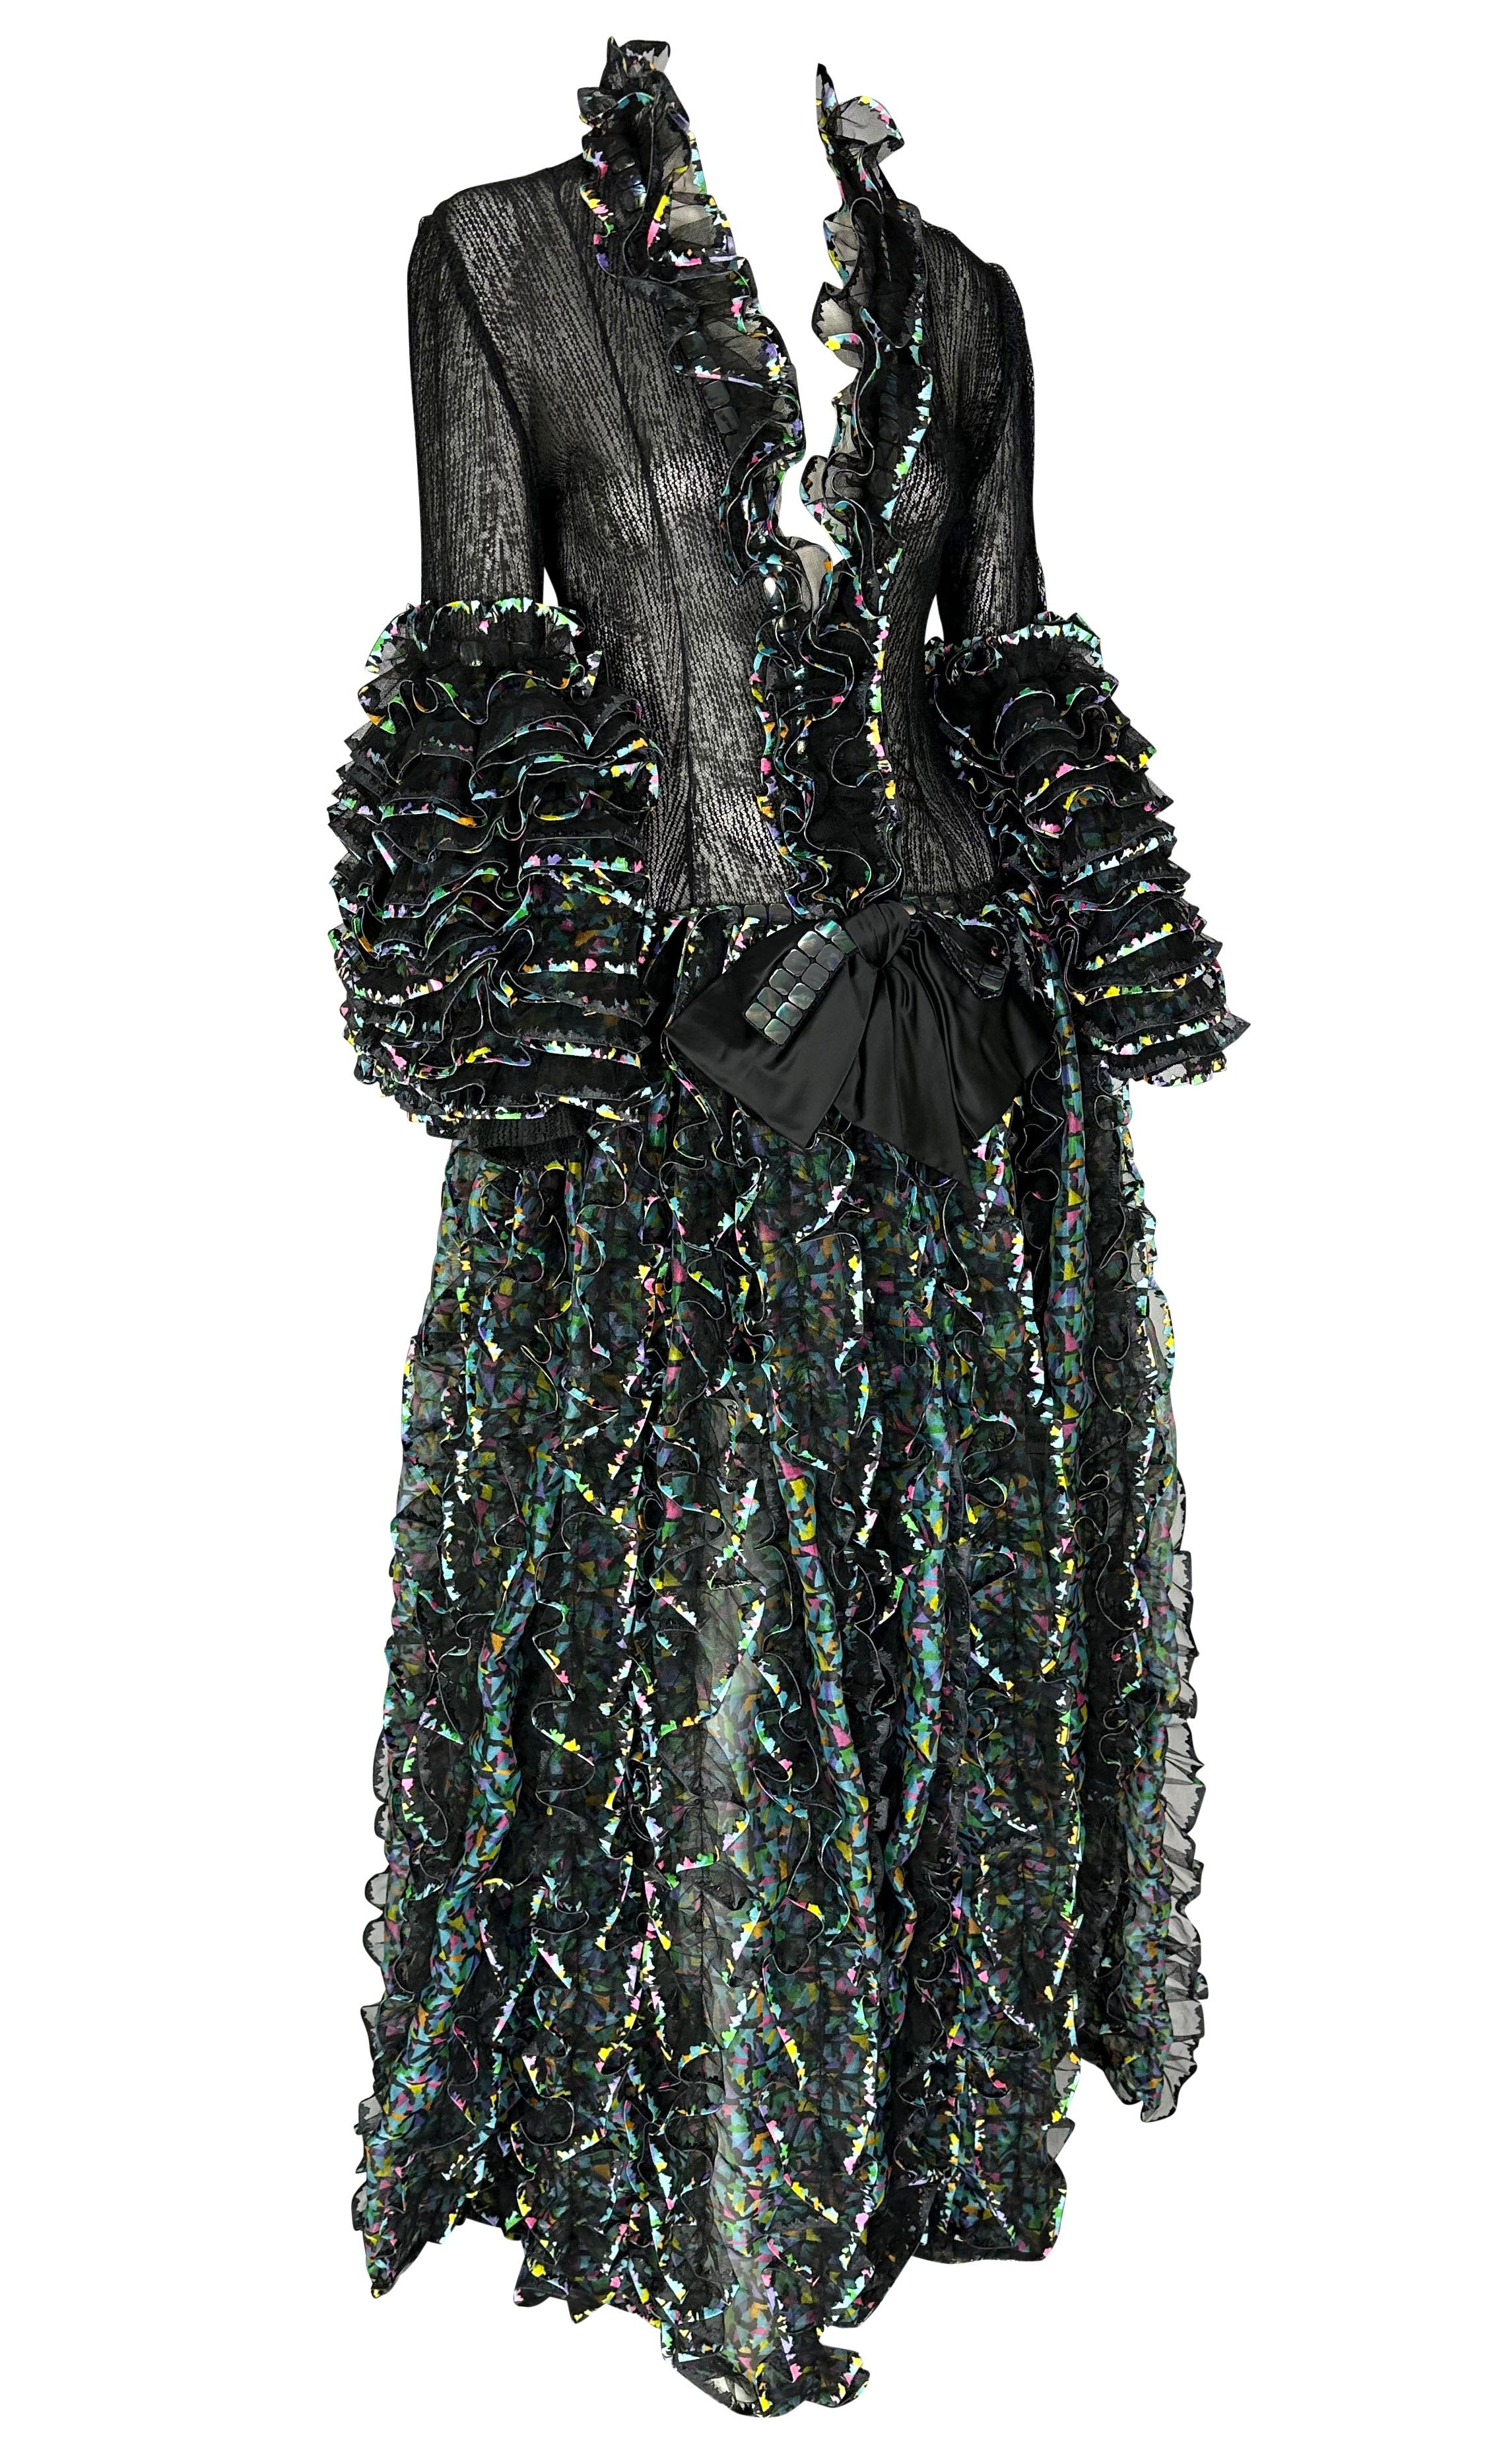 S/S 1987 Paco Rabanne Haute Couture Runway Sheer Embroidered Ruffle Gown For Sale 6